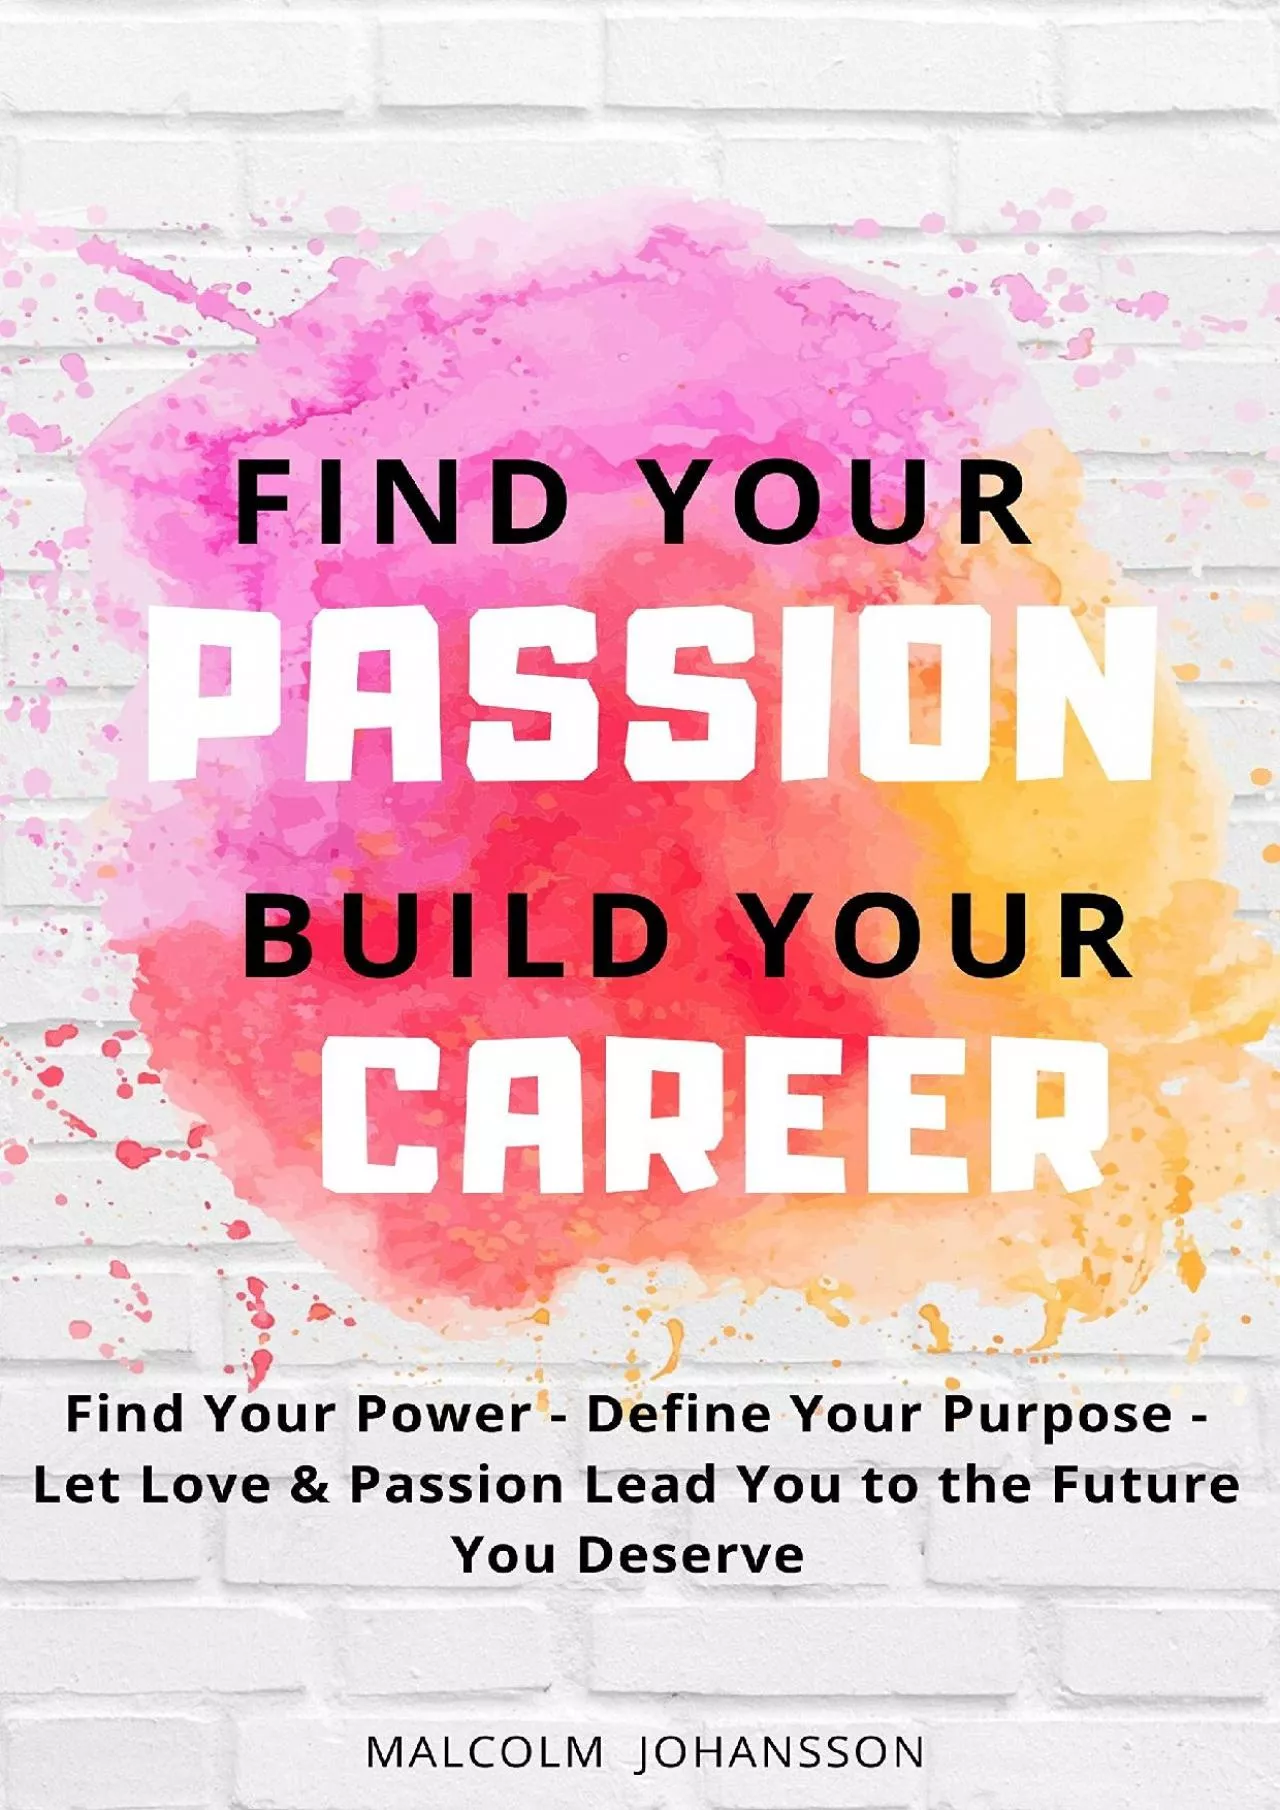 [EBOOK] FIND YOUR PASSION - BUILD YOUR CAREER: Find Your Power - Define Your Purpose -